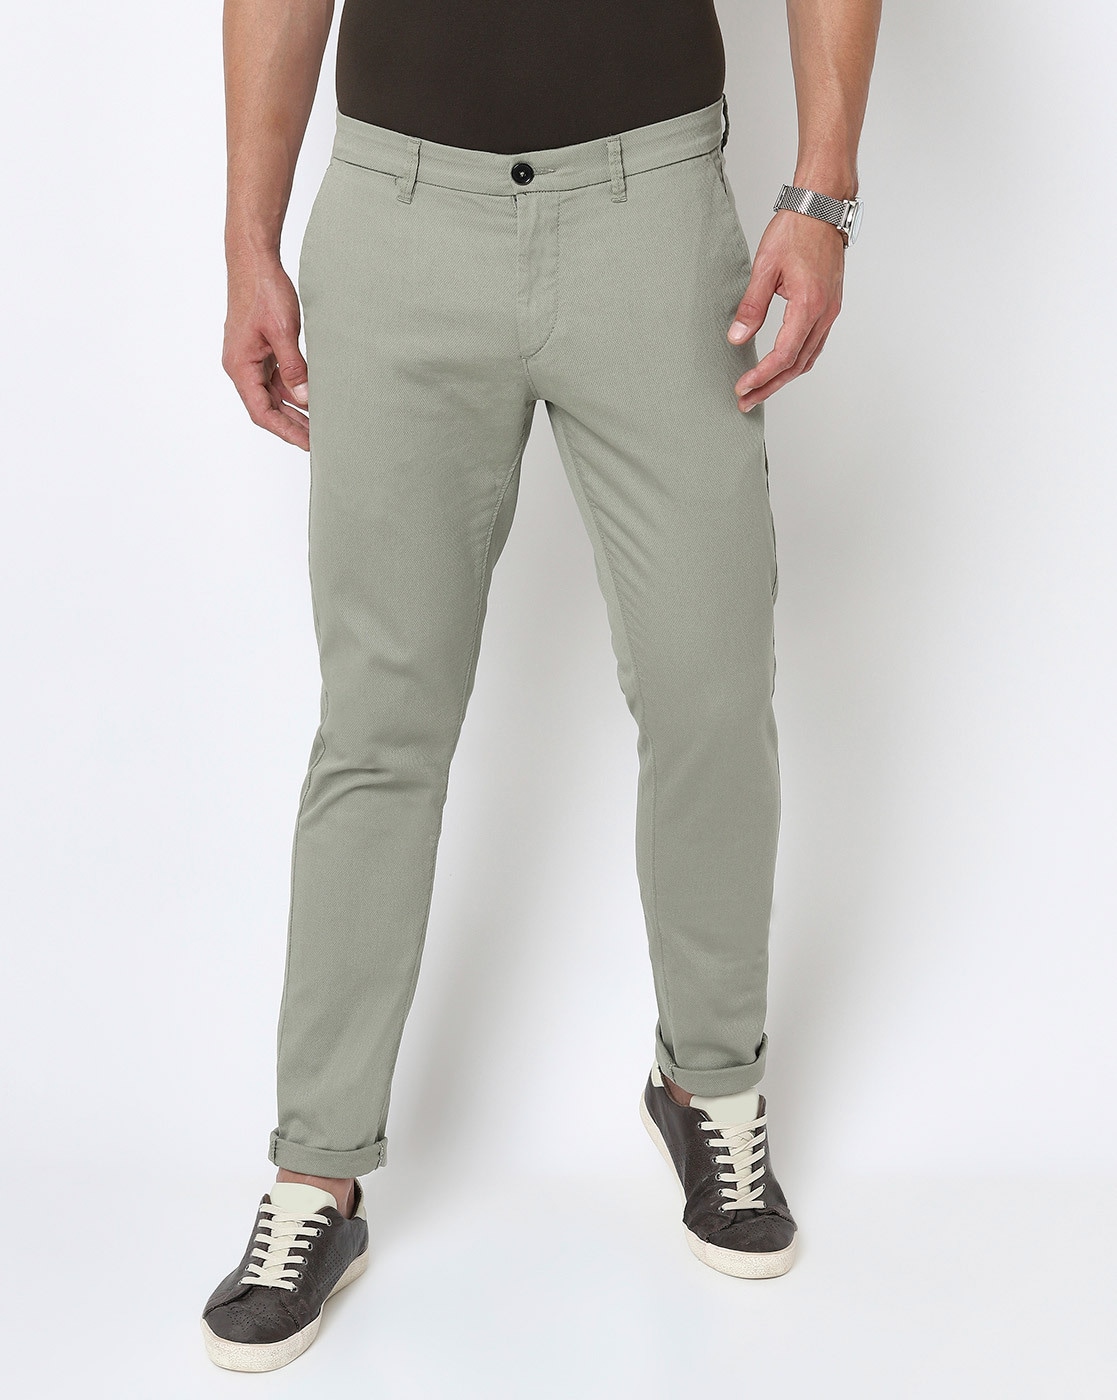 Buy U.S. Polo Assn. Solid Corduroy Weave Casual Trousers - NNNOW.com